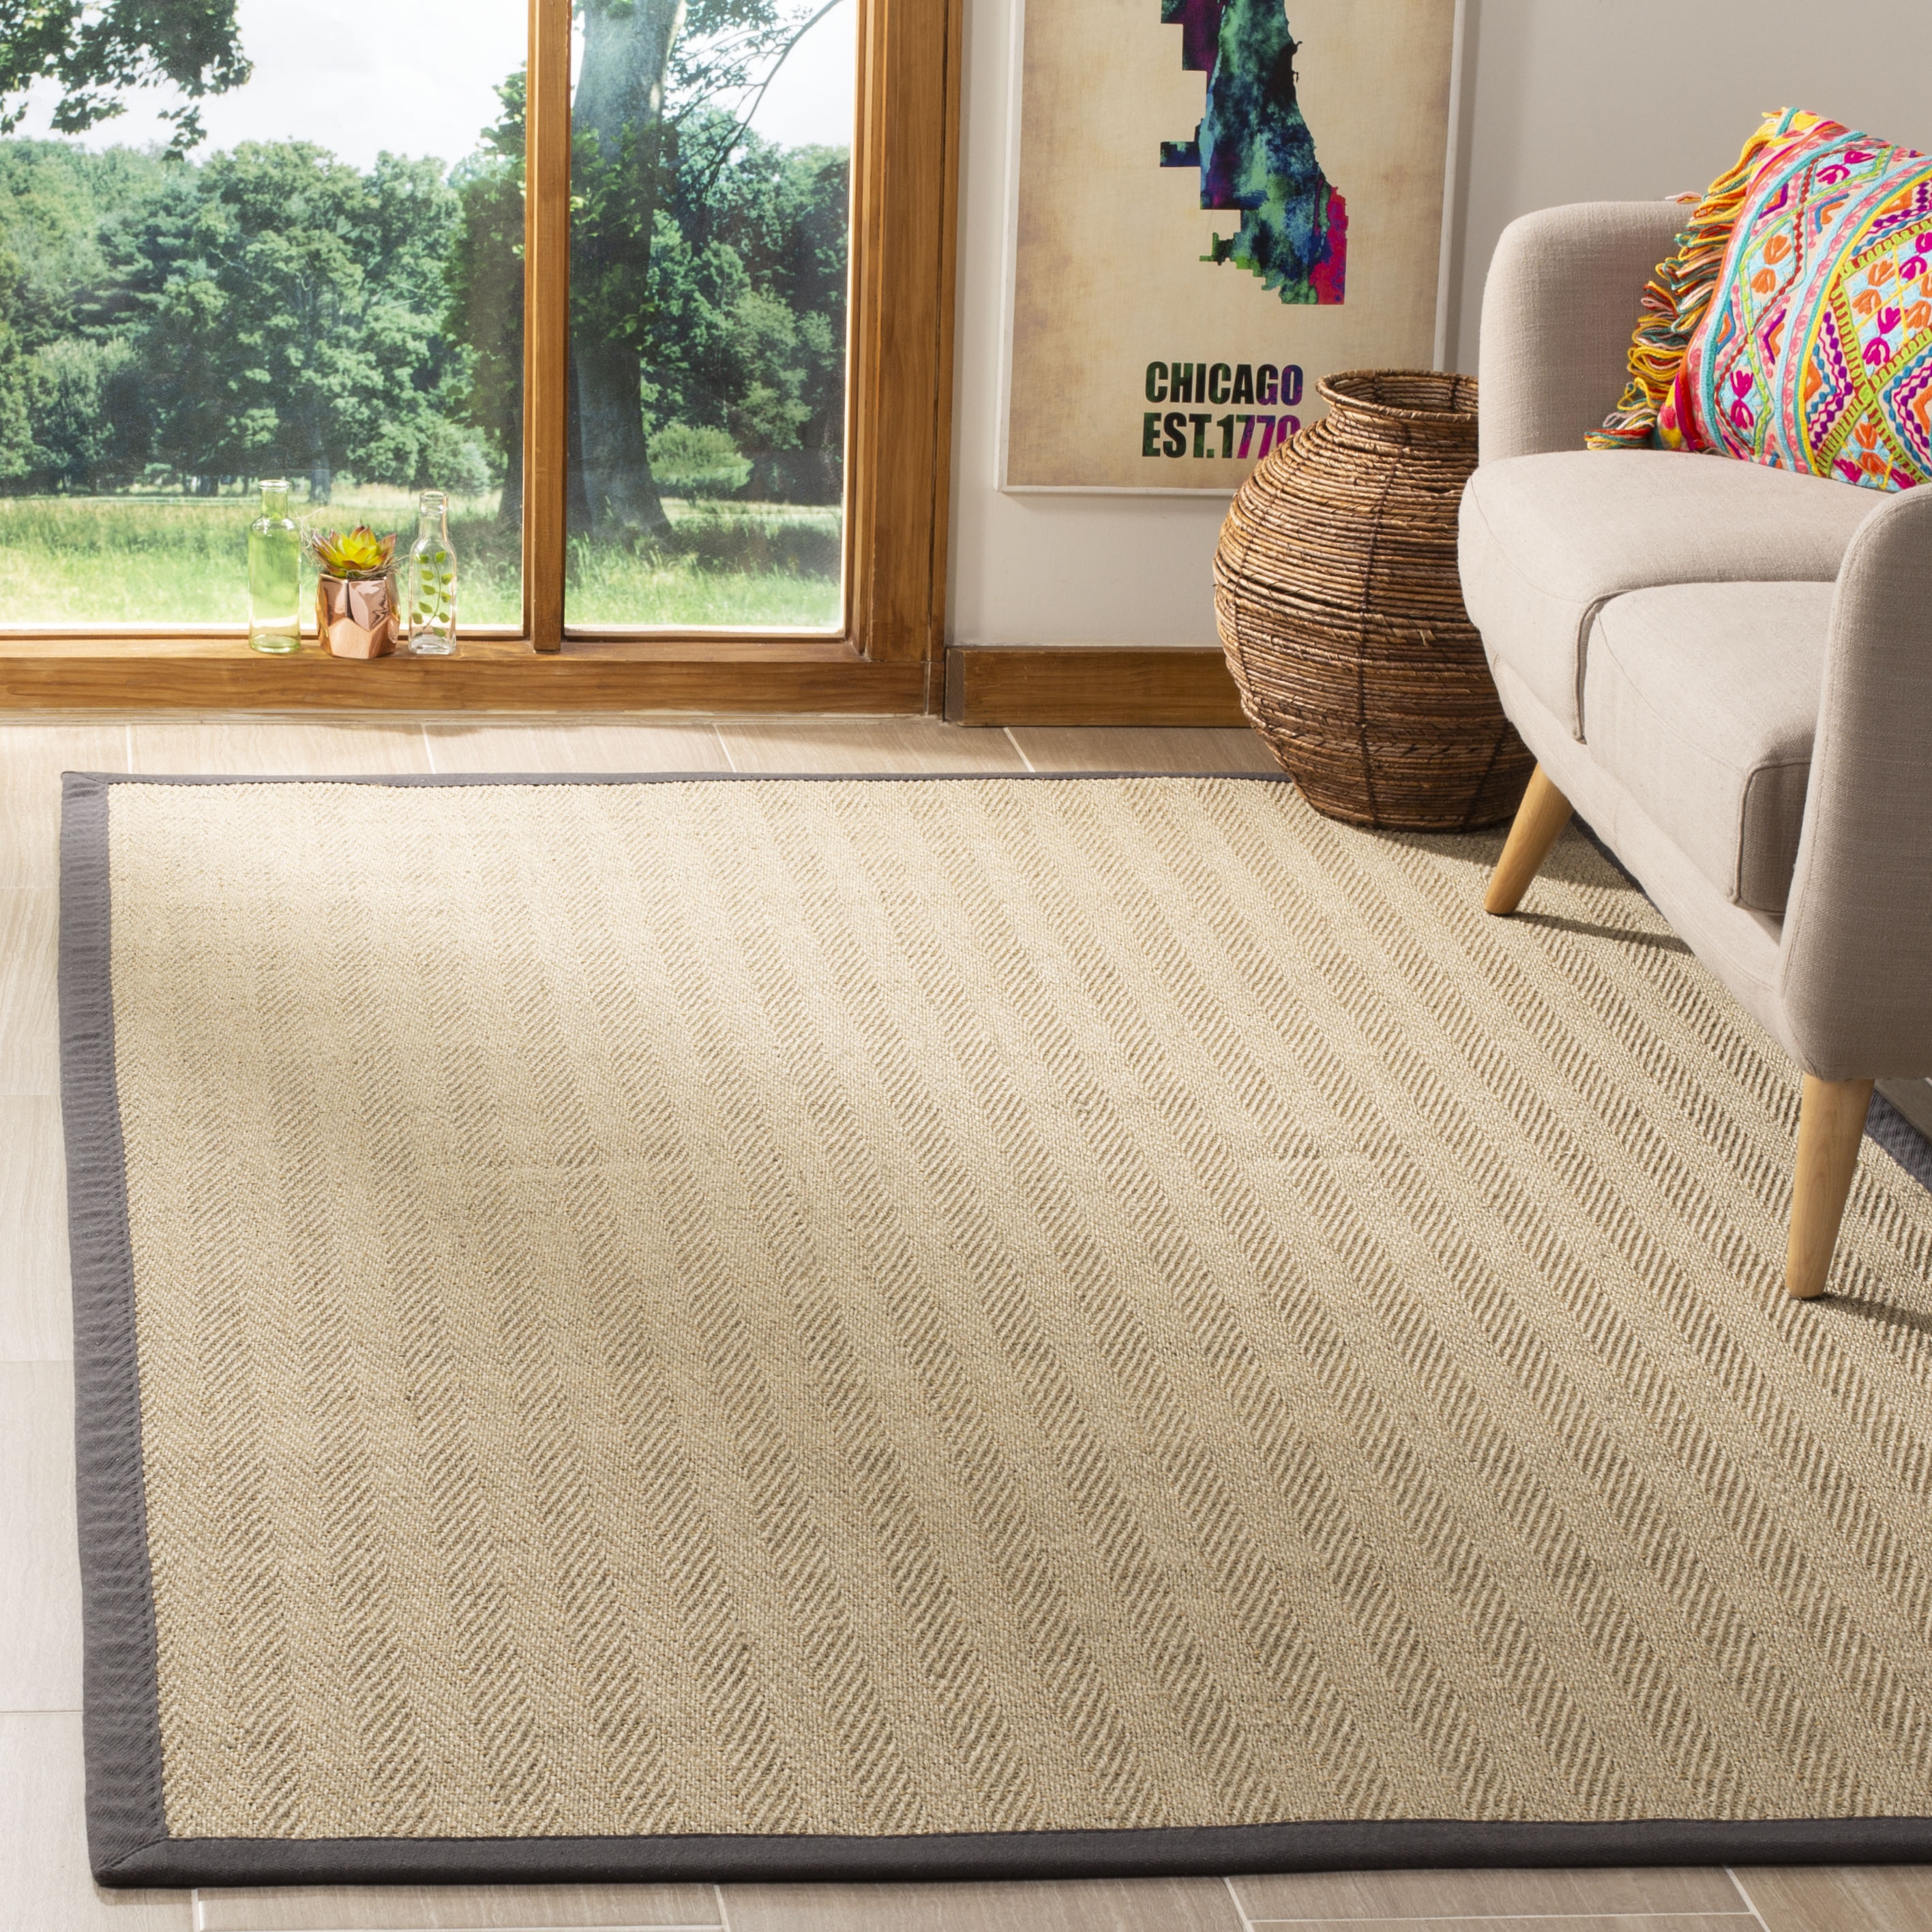 Arlo Home Woven Area Rug, NF134A, Natural/Grey,  4' X 6' - Image 1